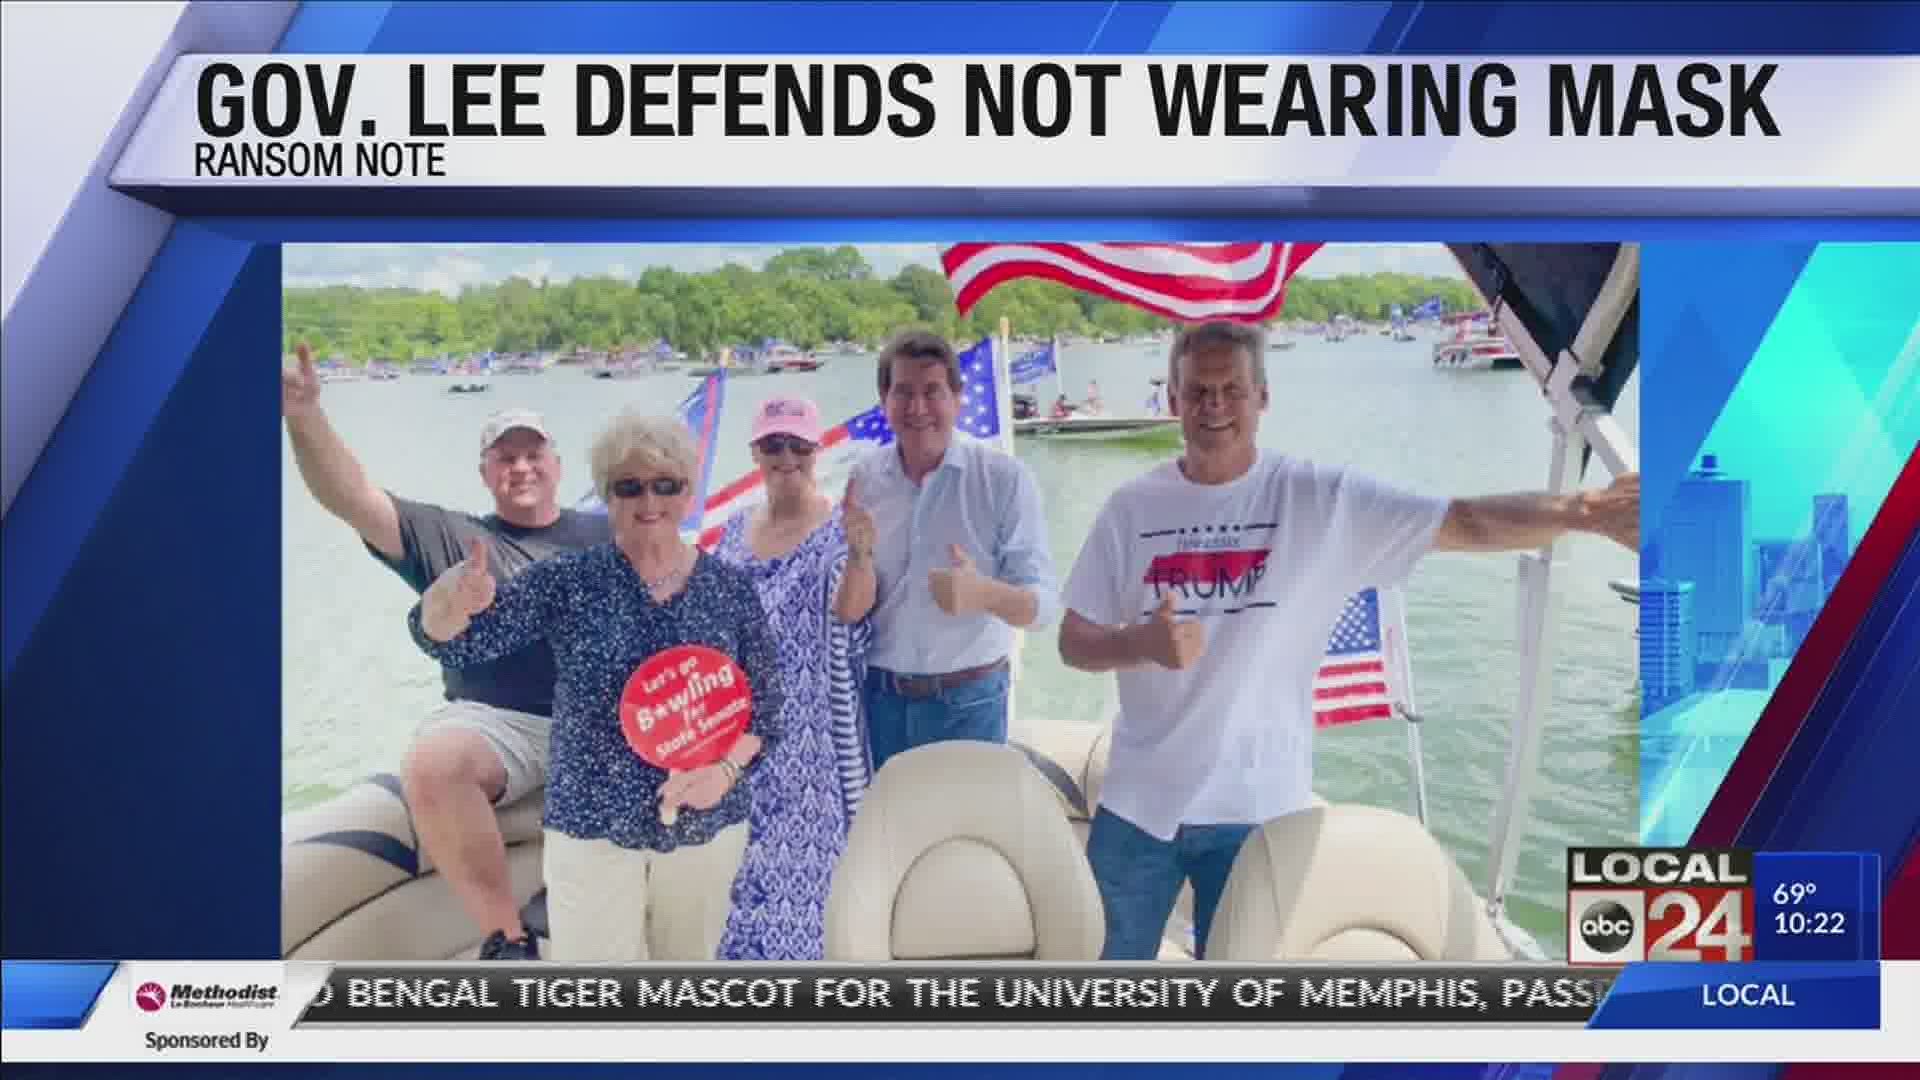 A photo was released of Governor Lee at a Trump boat rally with no mask and no social distancing.